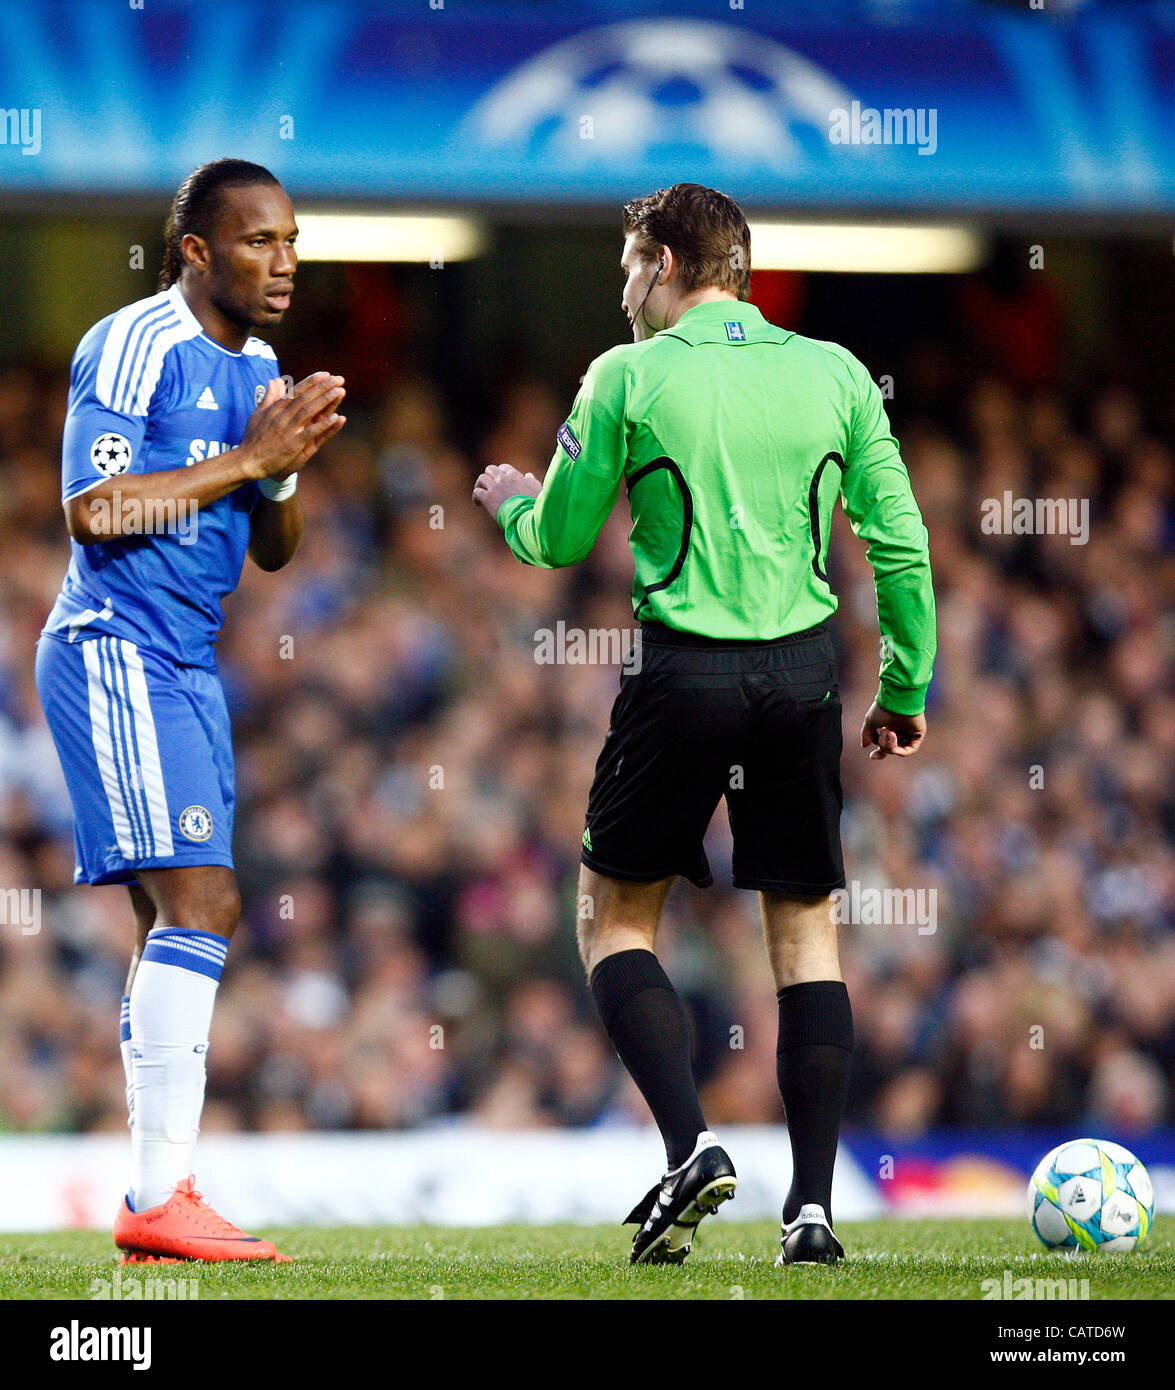 18.04.2012. Stamford Bridge, Chelsea, London.  Referee Felix Brych ( Germany ) having words with Chelsea's Ivory Coast footballer Didier Drogba during the Champions League Semi Final 1st  leg match between Chelsea and Barcelona  at Stamford Bridge, Stadium on April 18, 2012 in London, England. Stock Photo